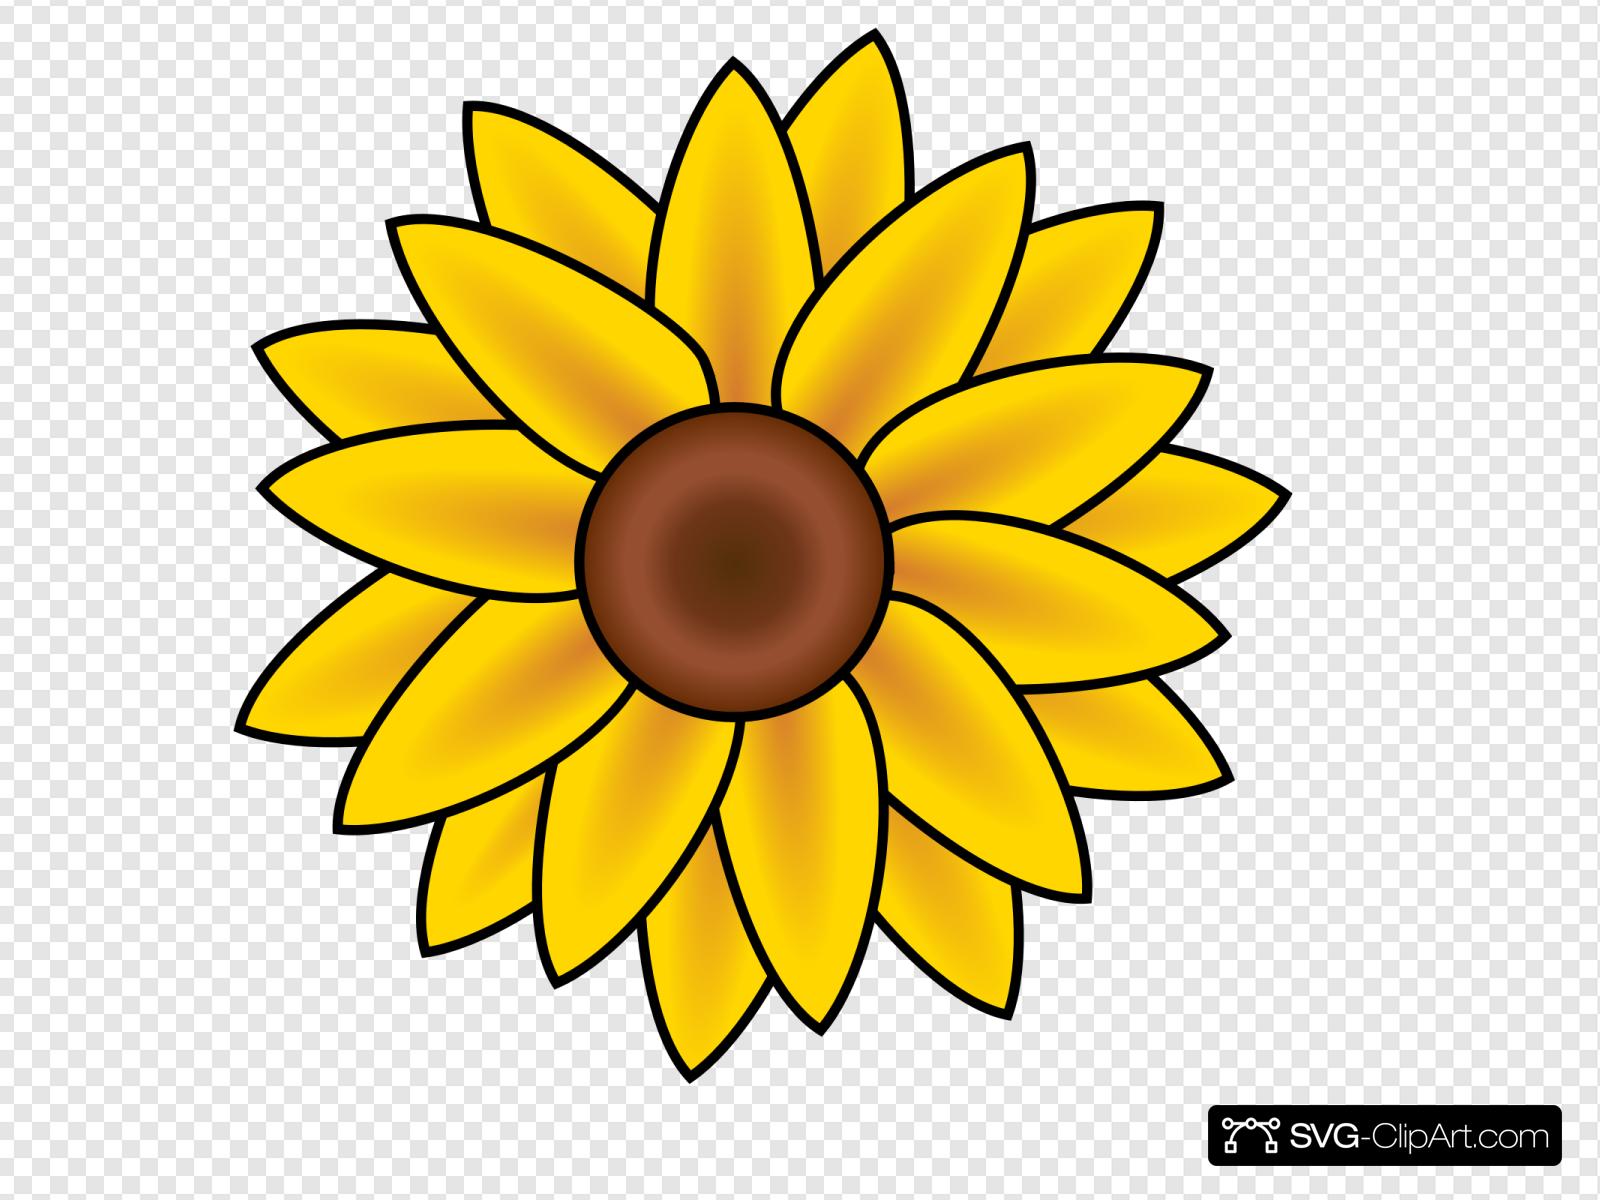 Sunflower Clip art, Icon and SVG